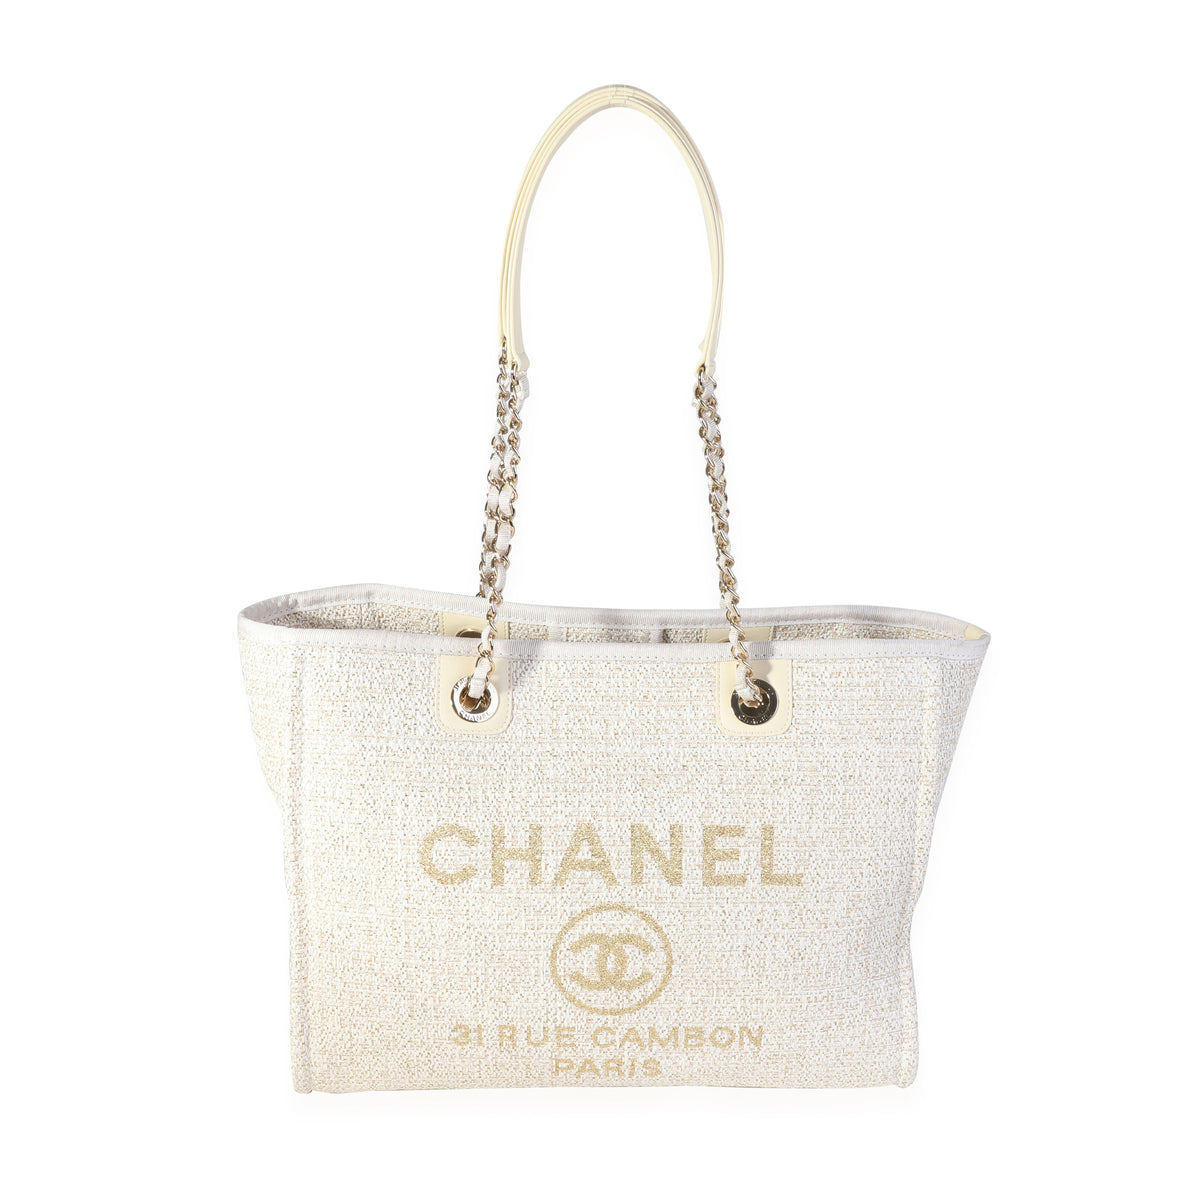 Chanel Navy Blue Tweed Medium Deauville Tote Chanel